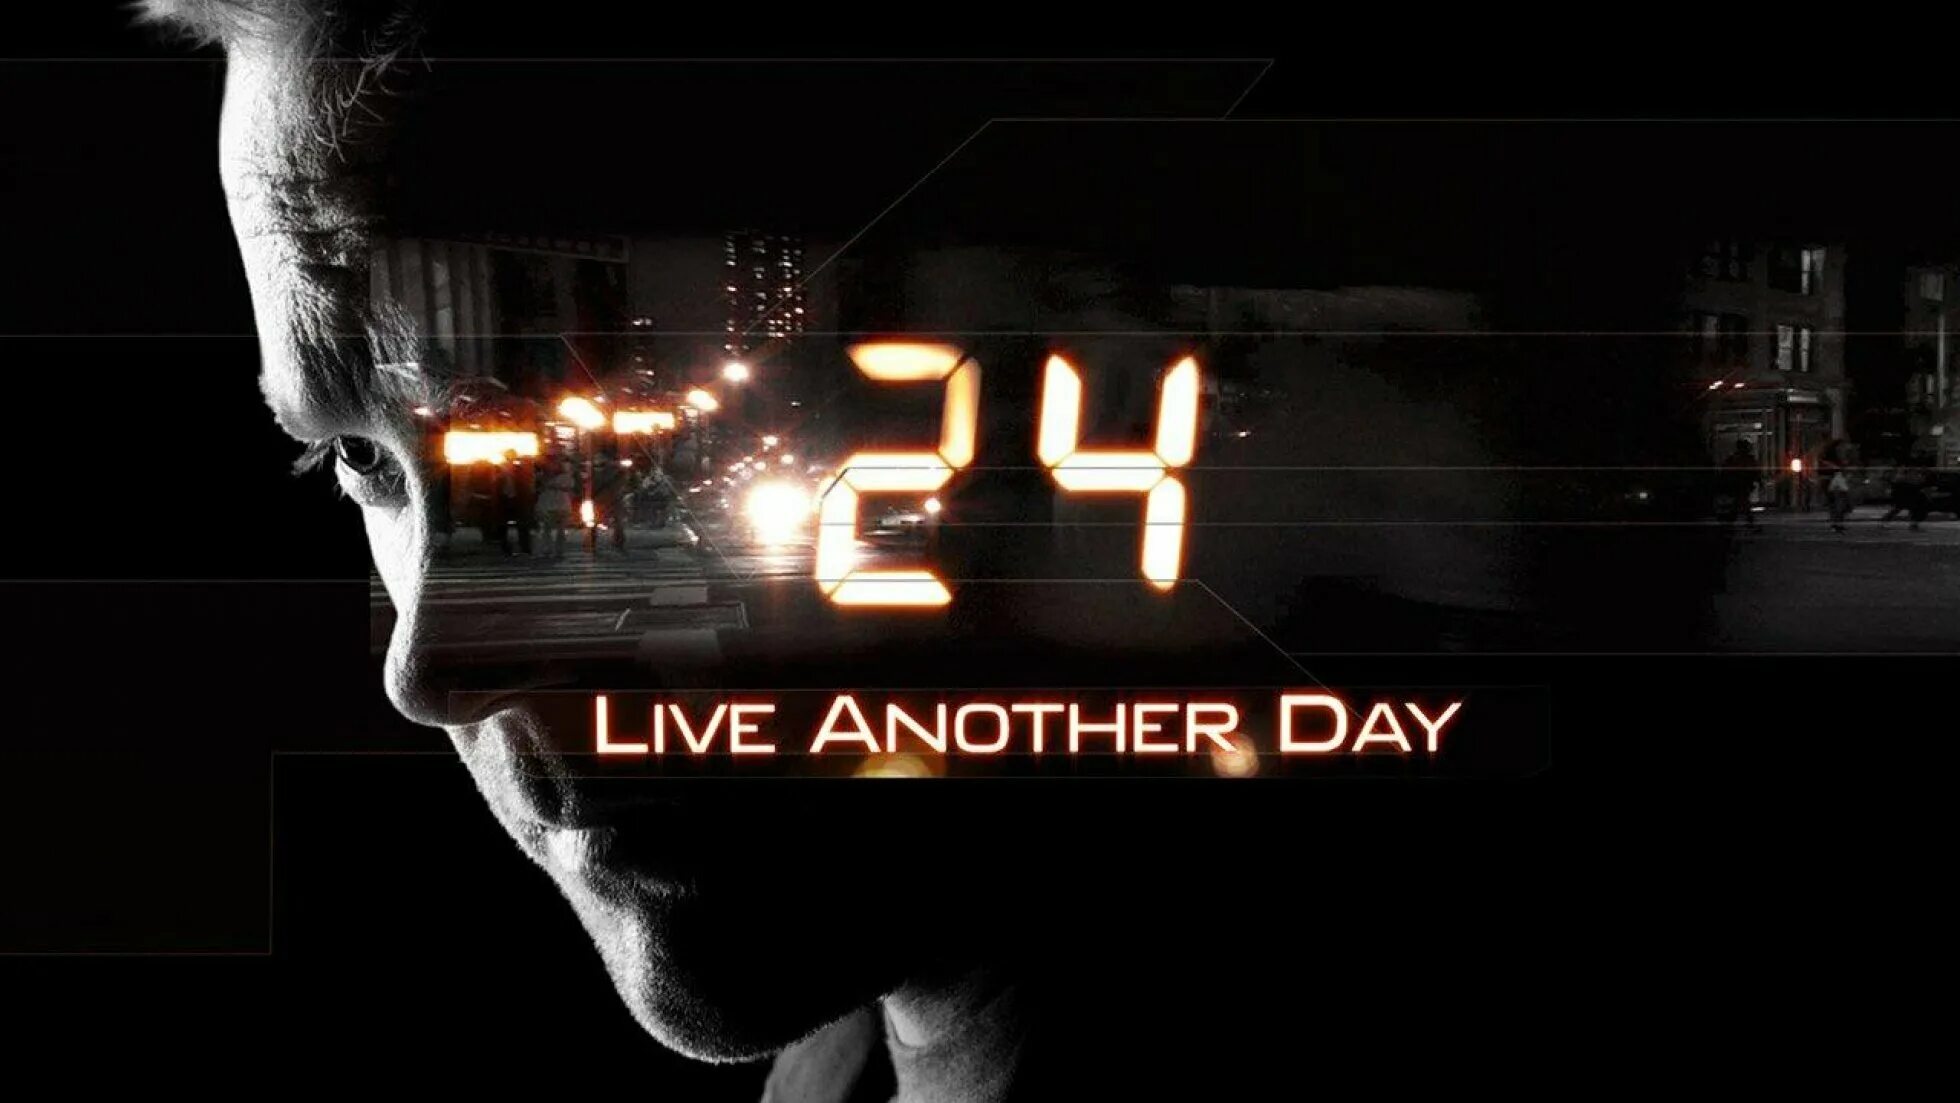 24 Часа. Обои 24 часа. 24 Часа фото. Live another Day. Welcome to the 24 hour store another